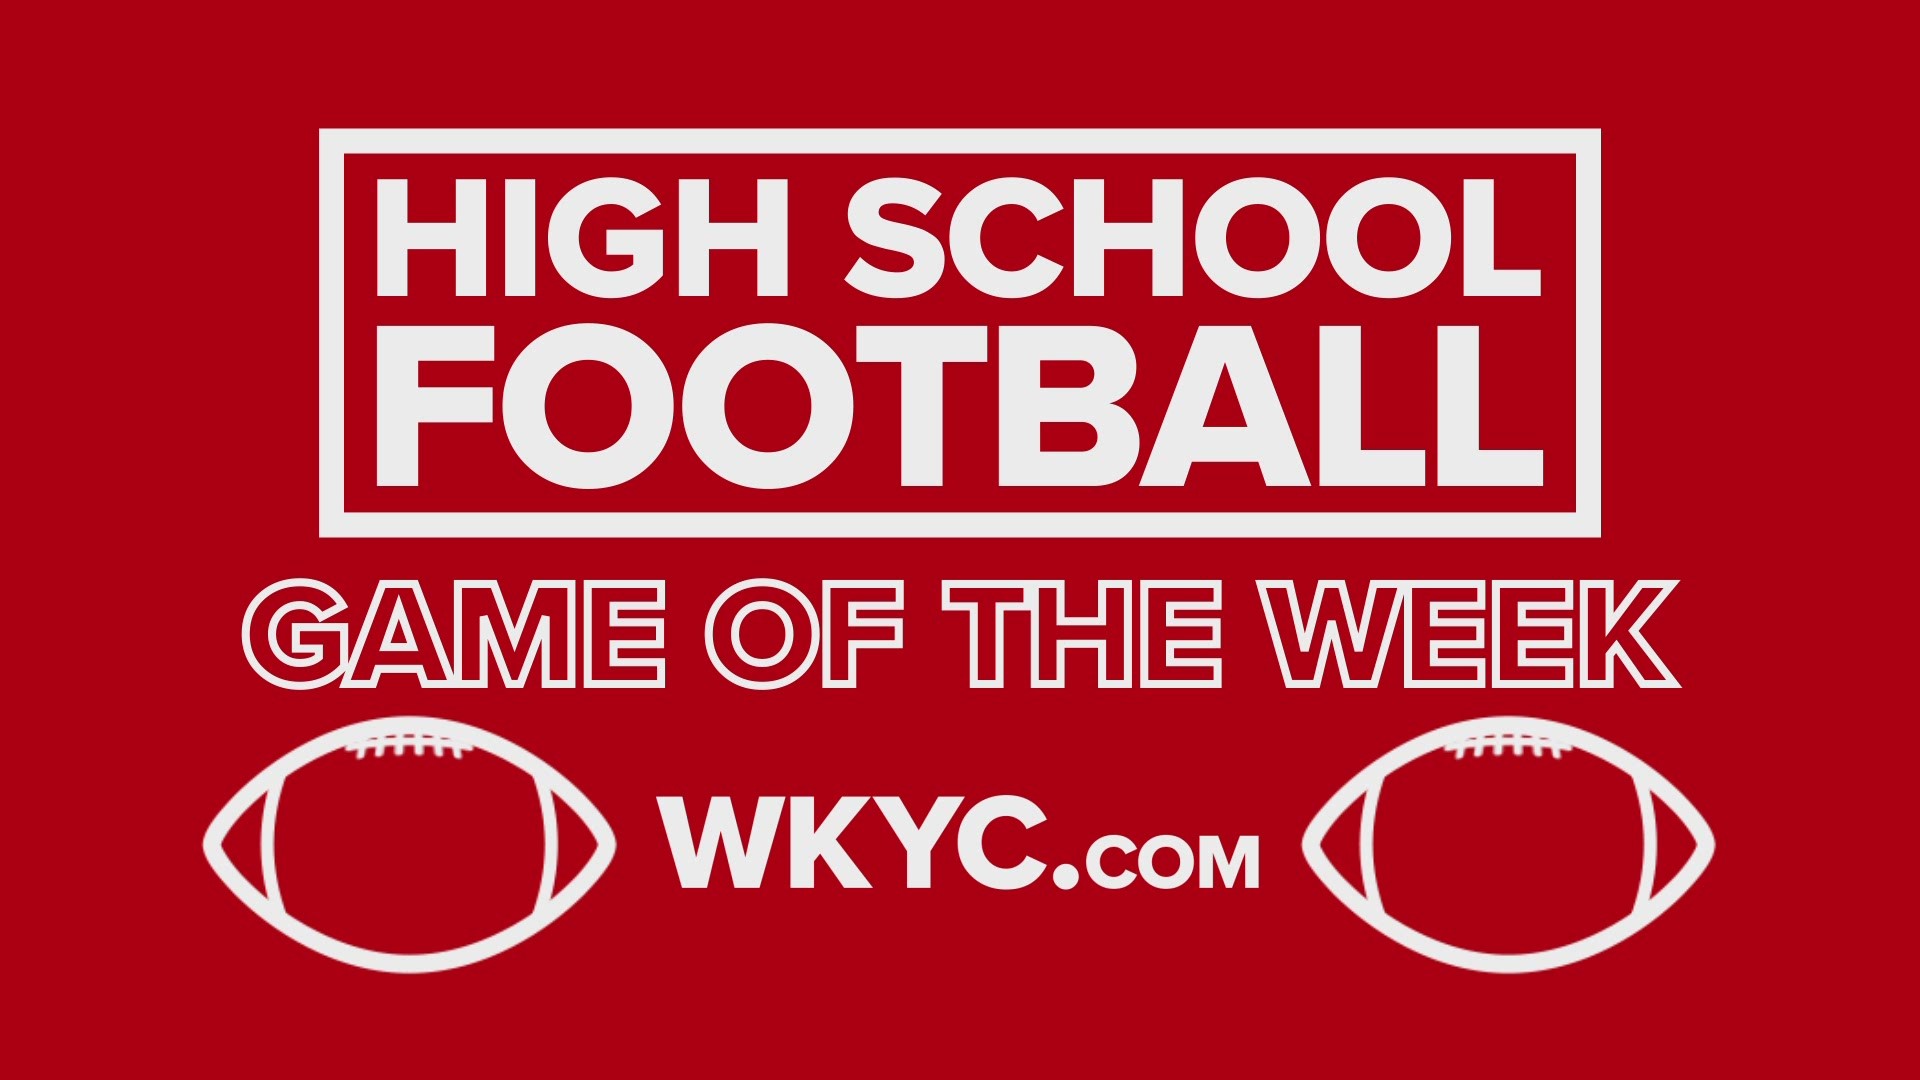 Canton McKinley beats Solon 28-15 in WKYC.com's HS Football Playoff Game of the Week